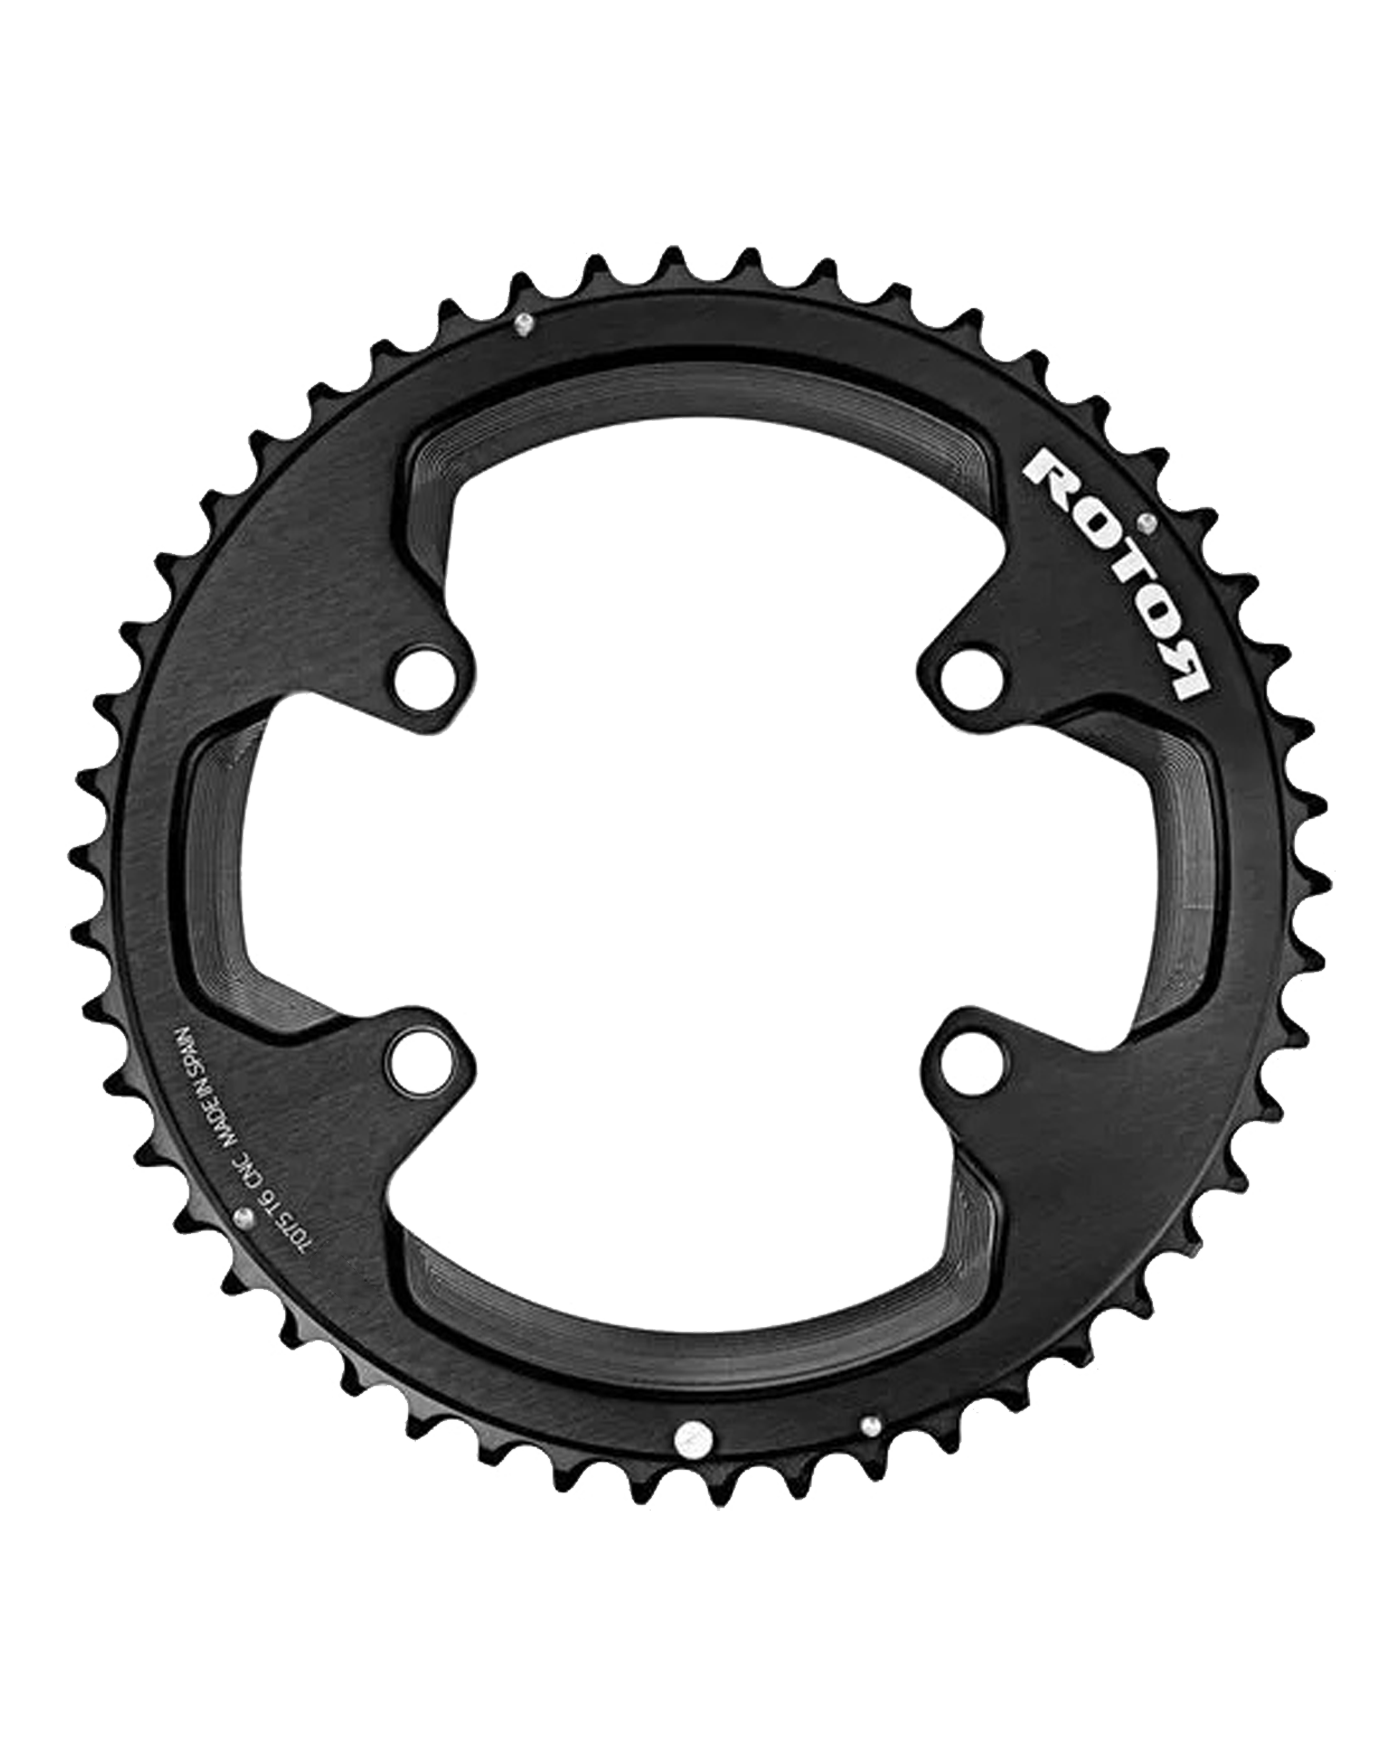 heerser Convergeren Vertrek naar Rotor Round Rings 2-speed 110mm 4-Hole 52T Outer Chainring | CANYON PA